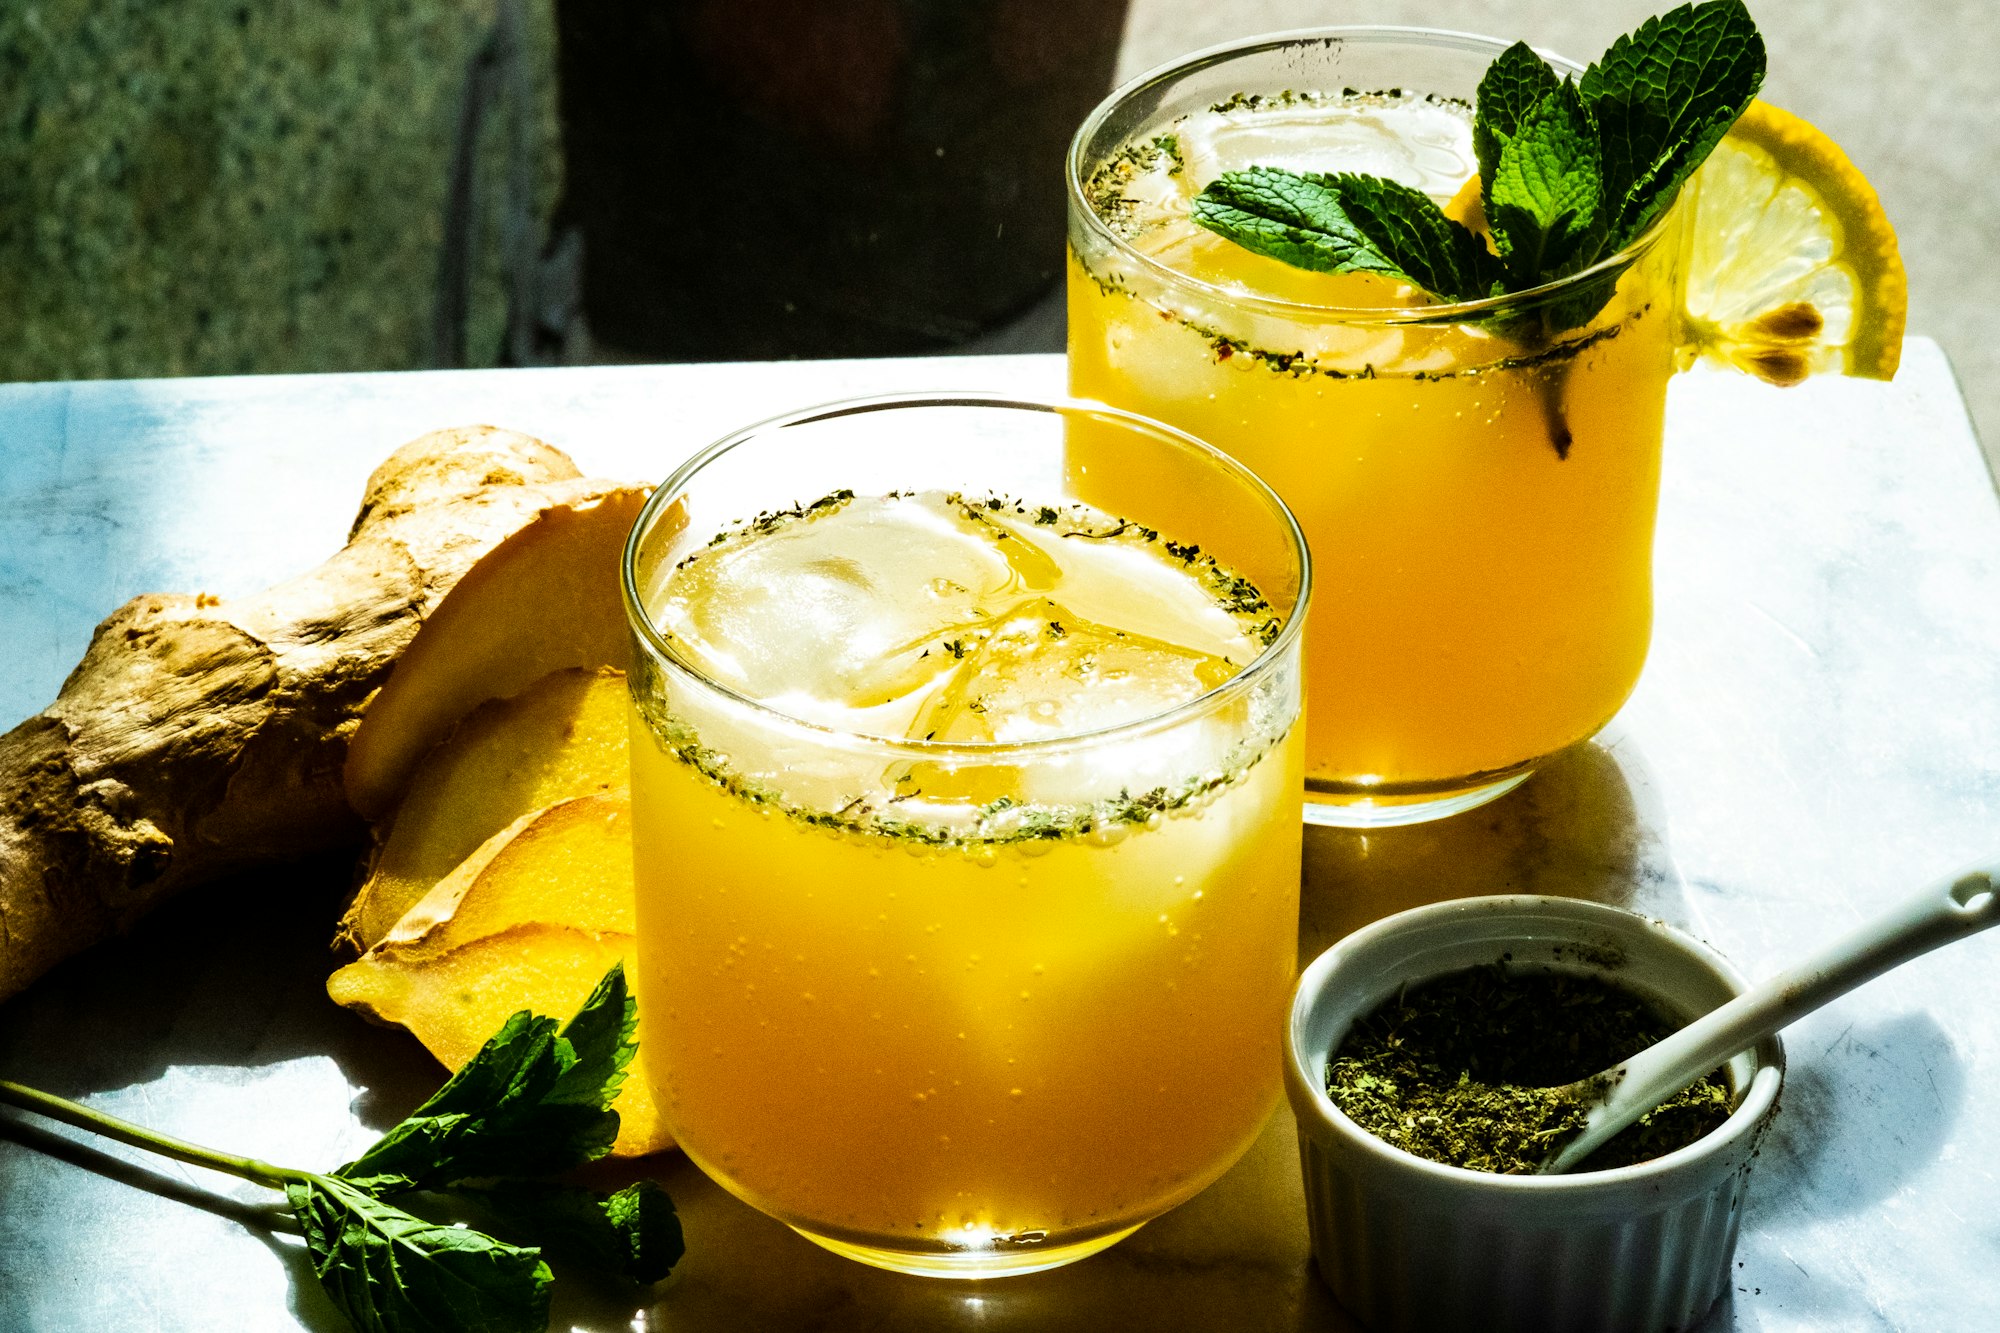 Lemon and lime juices with spices in a mocktail glass.